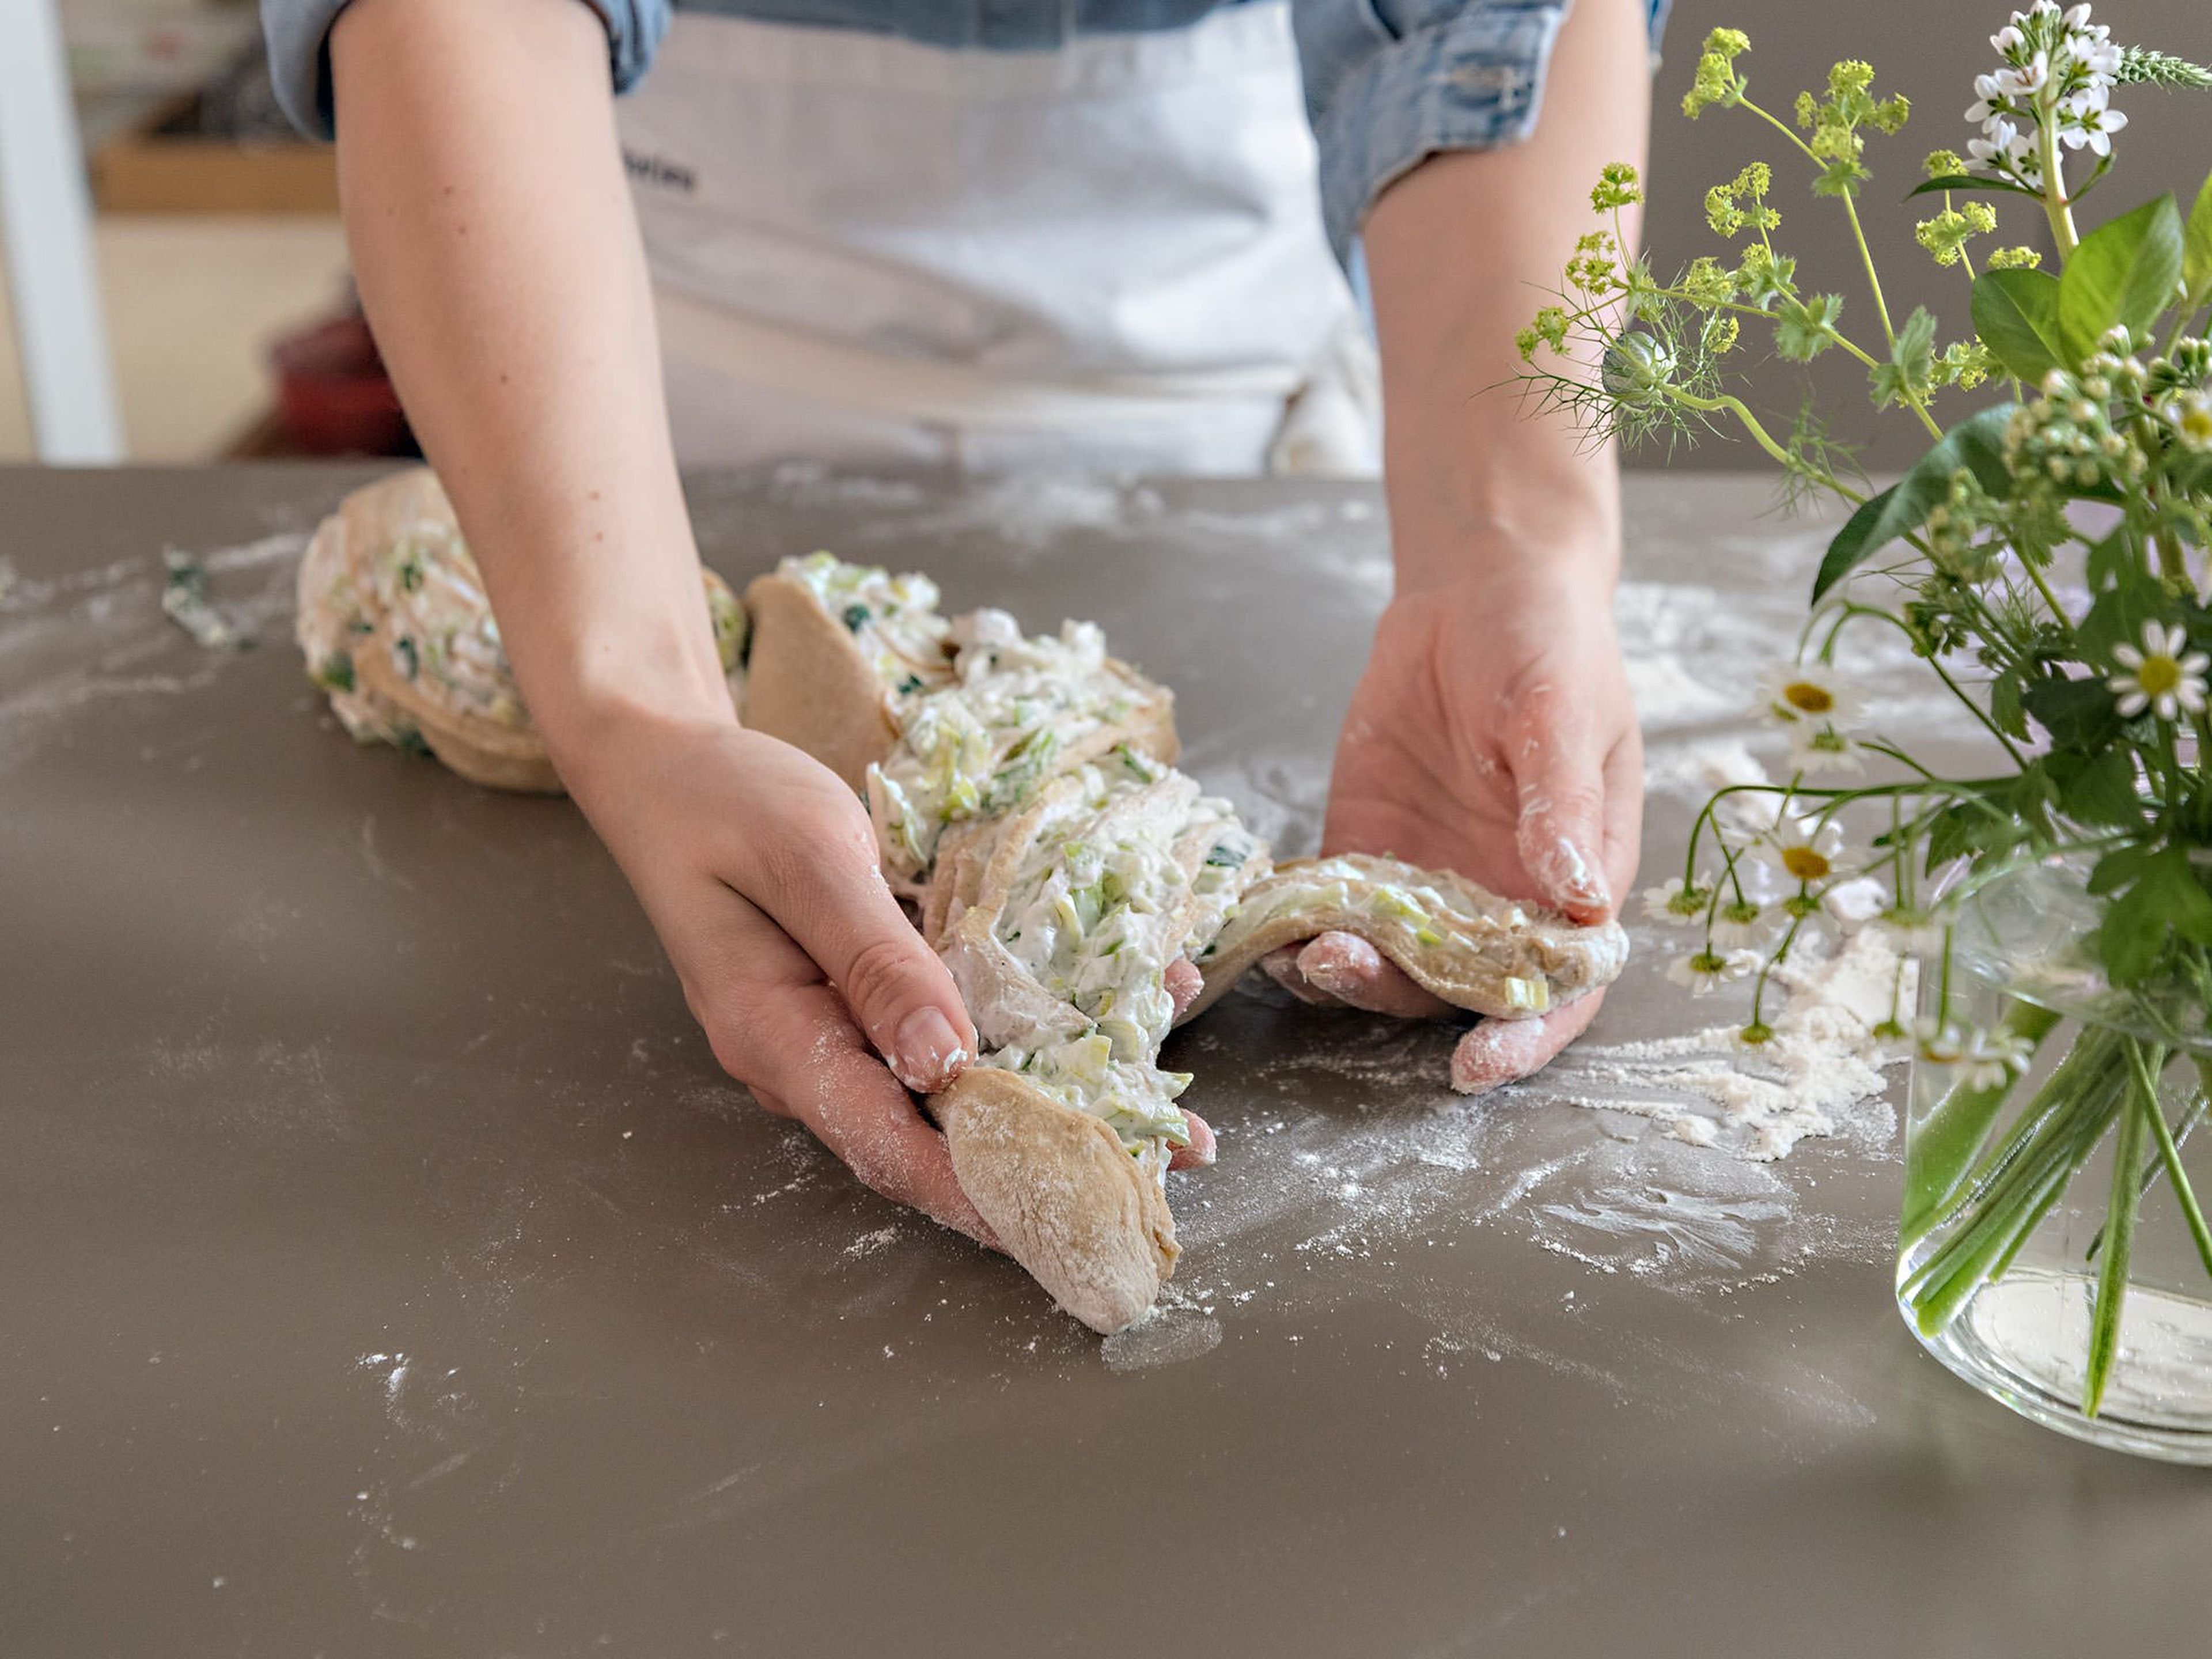 Cut half of the log in half lengthwise, and weave into a braid. Repeat with the other half of the log. Transfer dough to the loaf pan cut side-up and brush with olive oil.